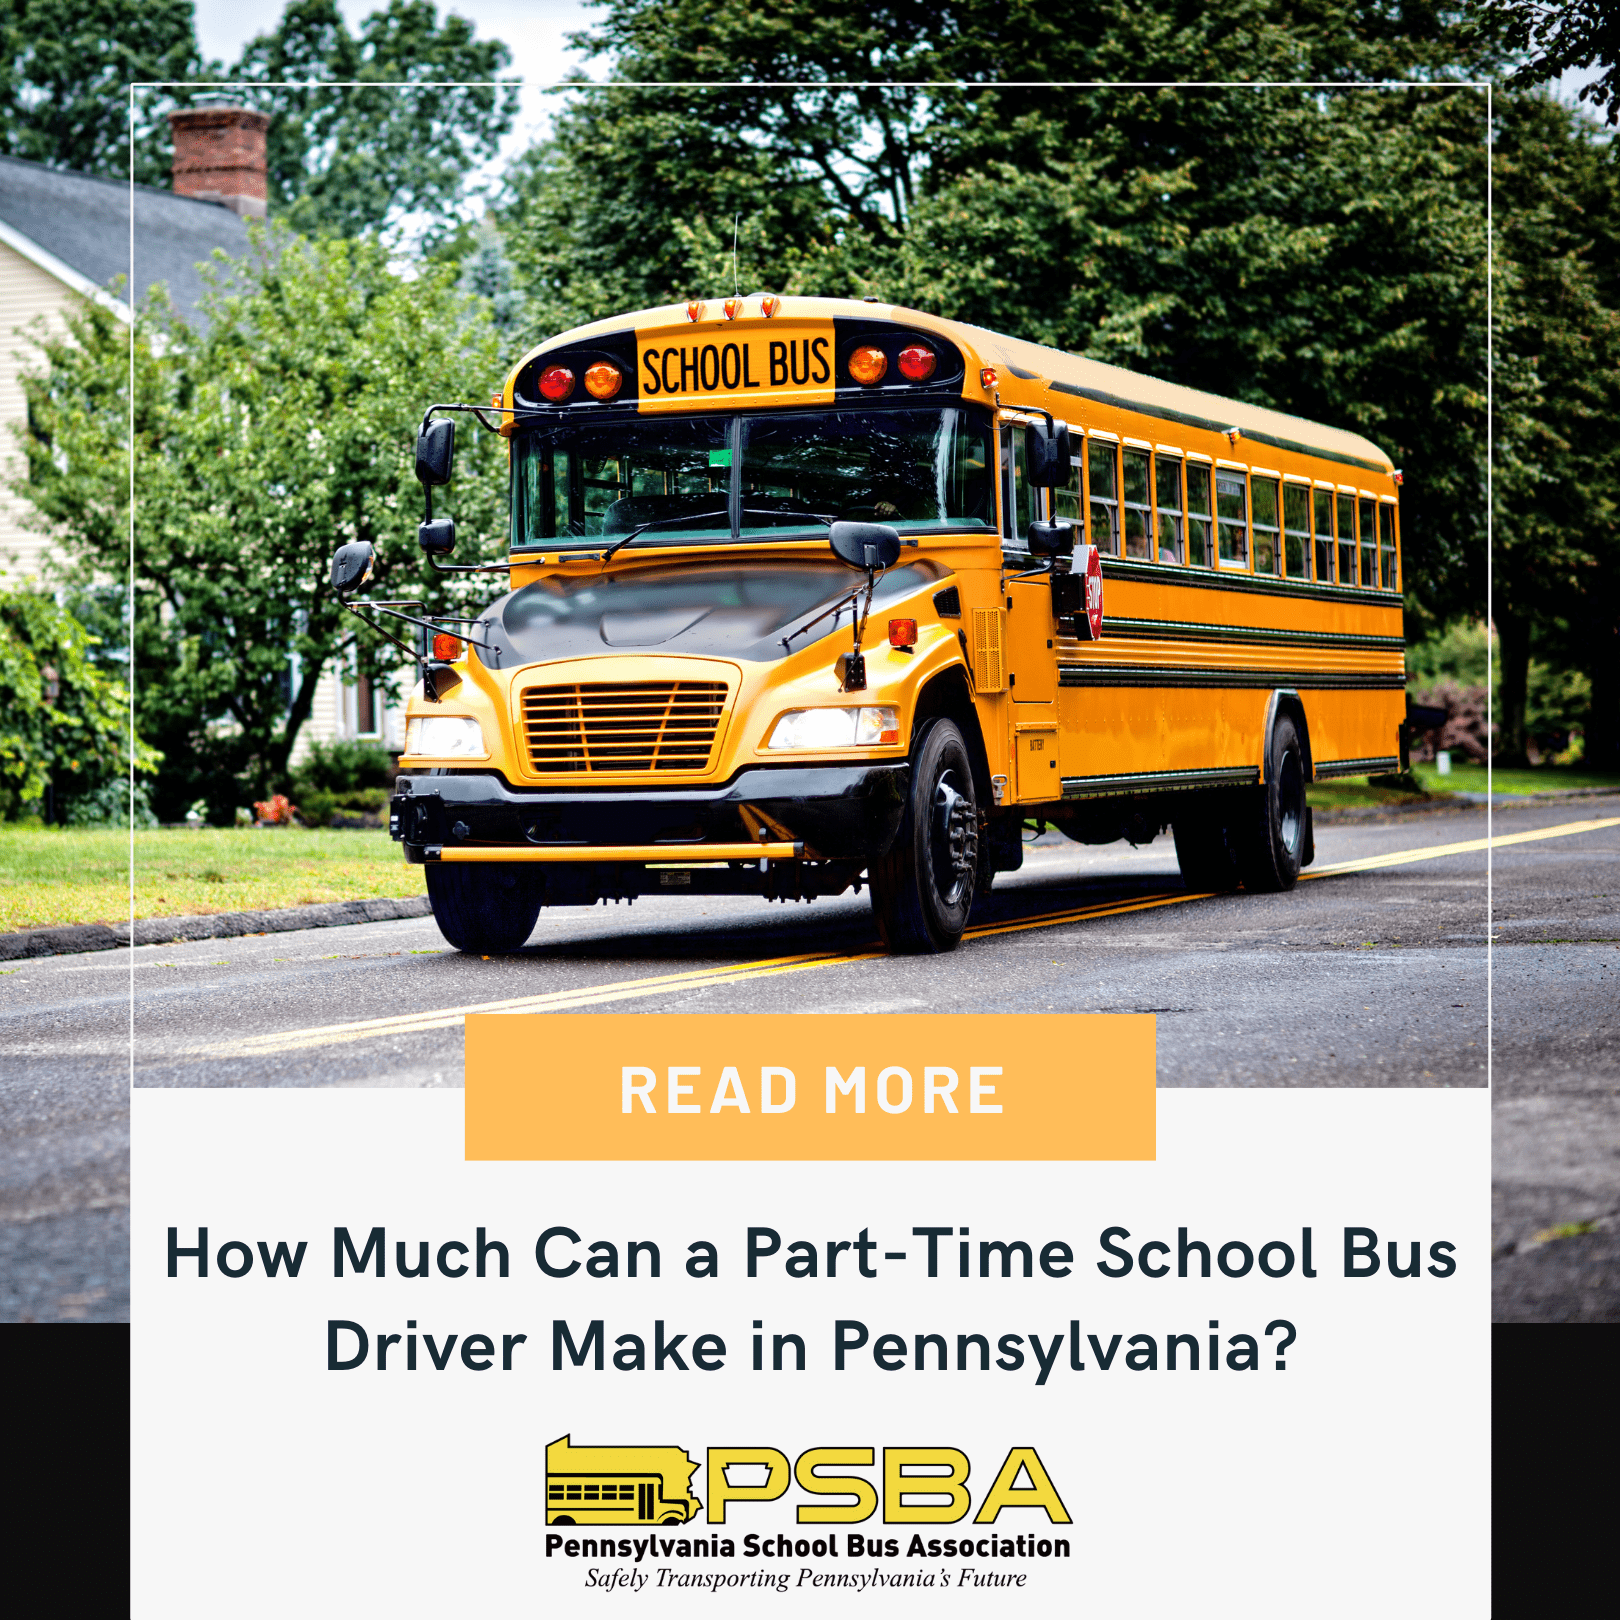 How Much Can a Part-Time School Bus Driver Make in Pennsylvania?